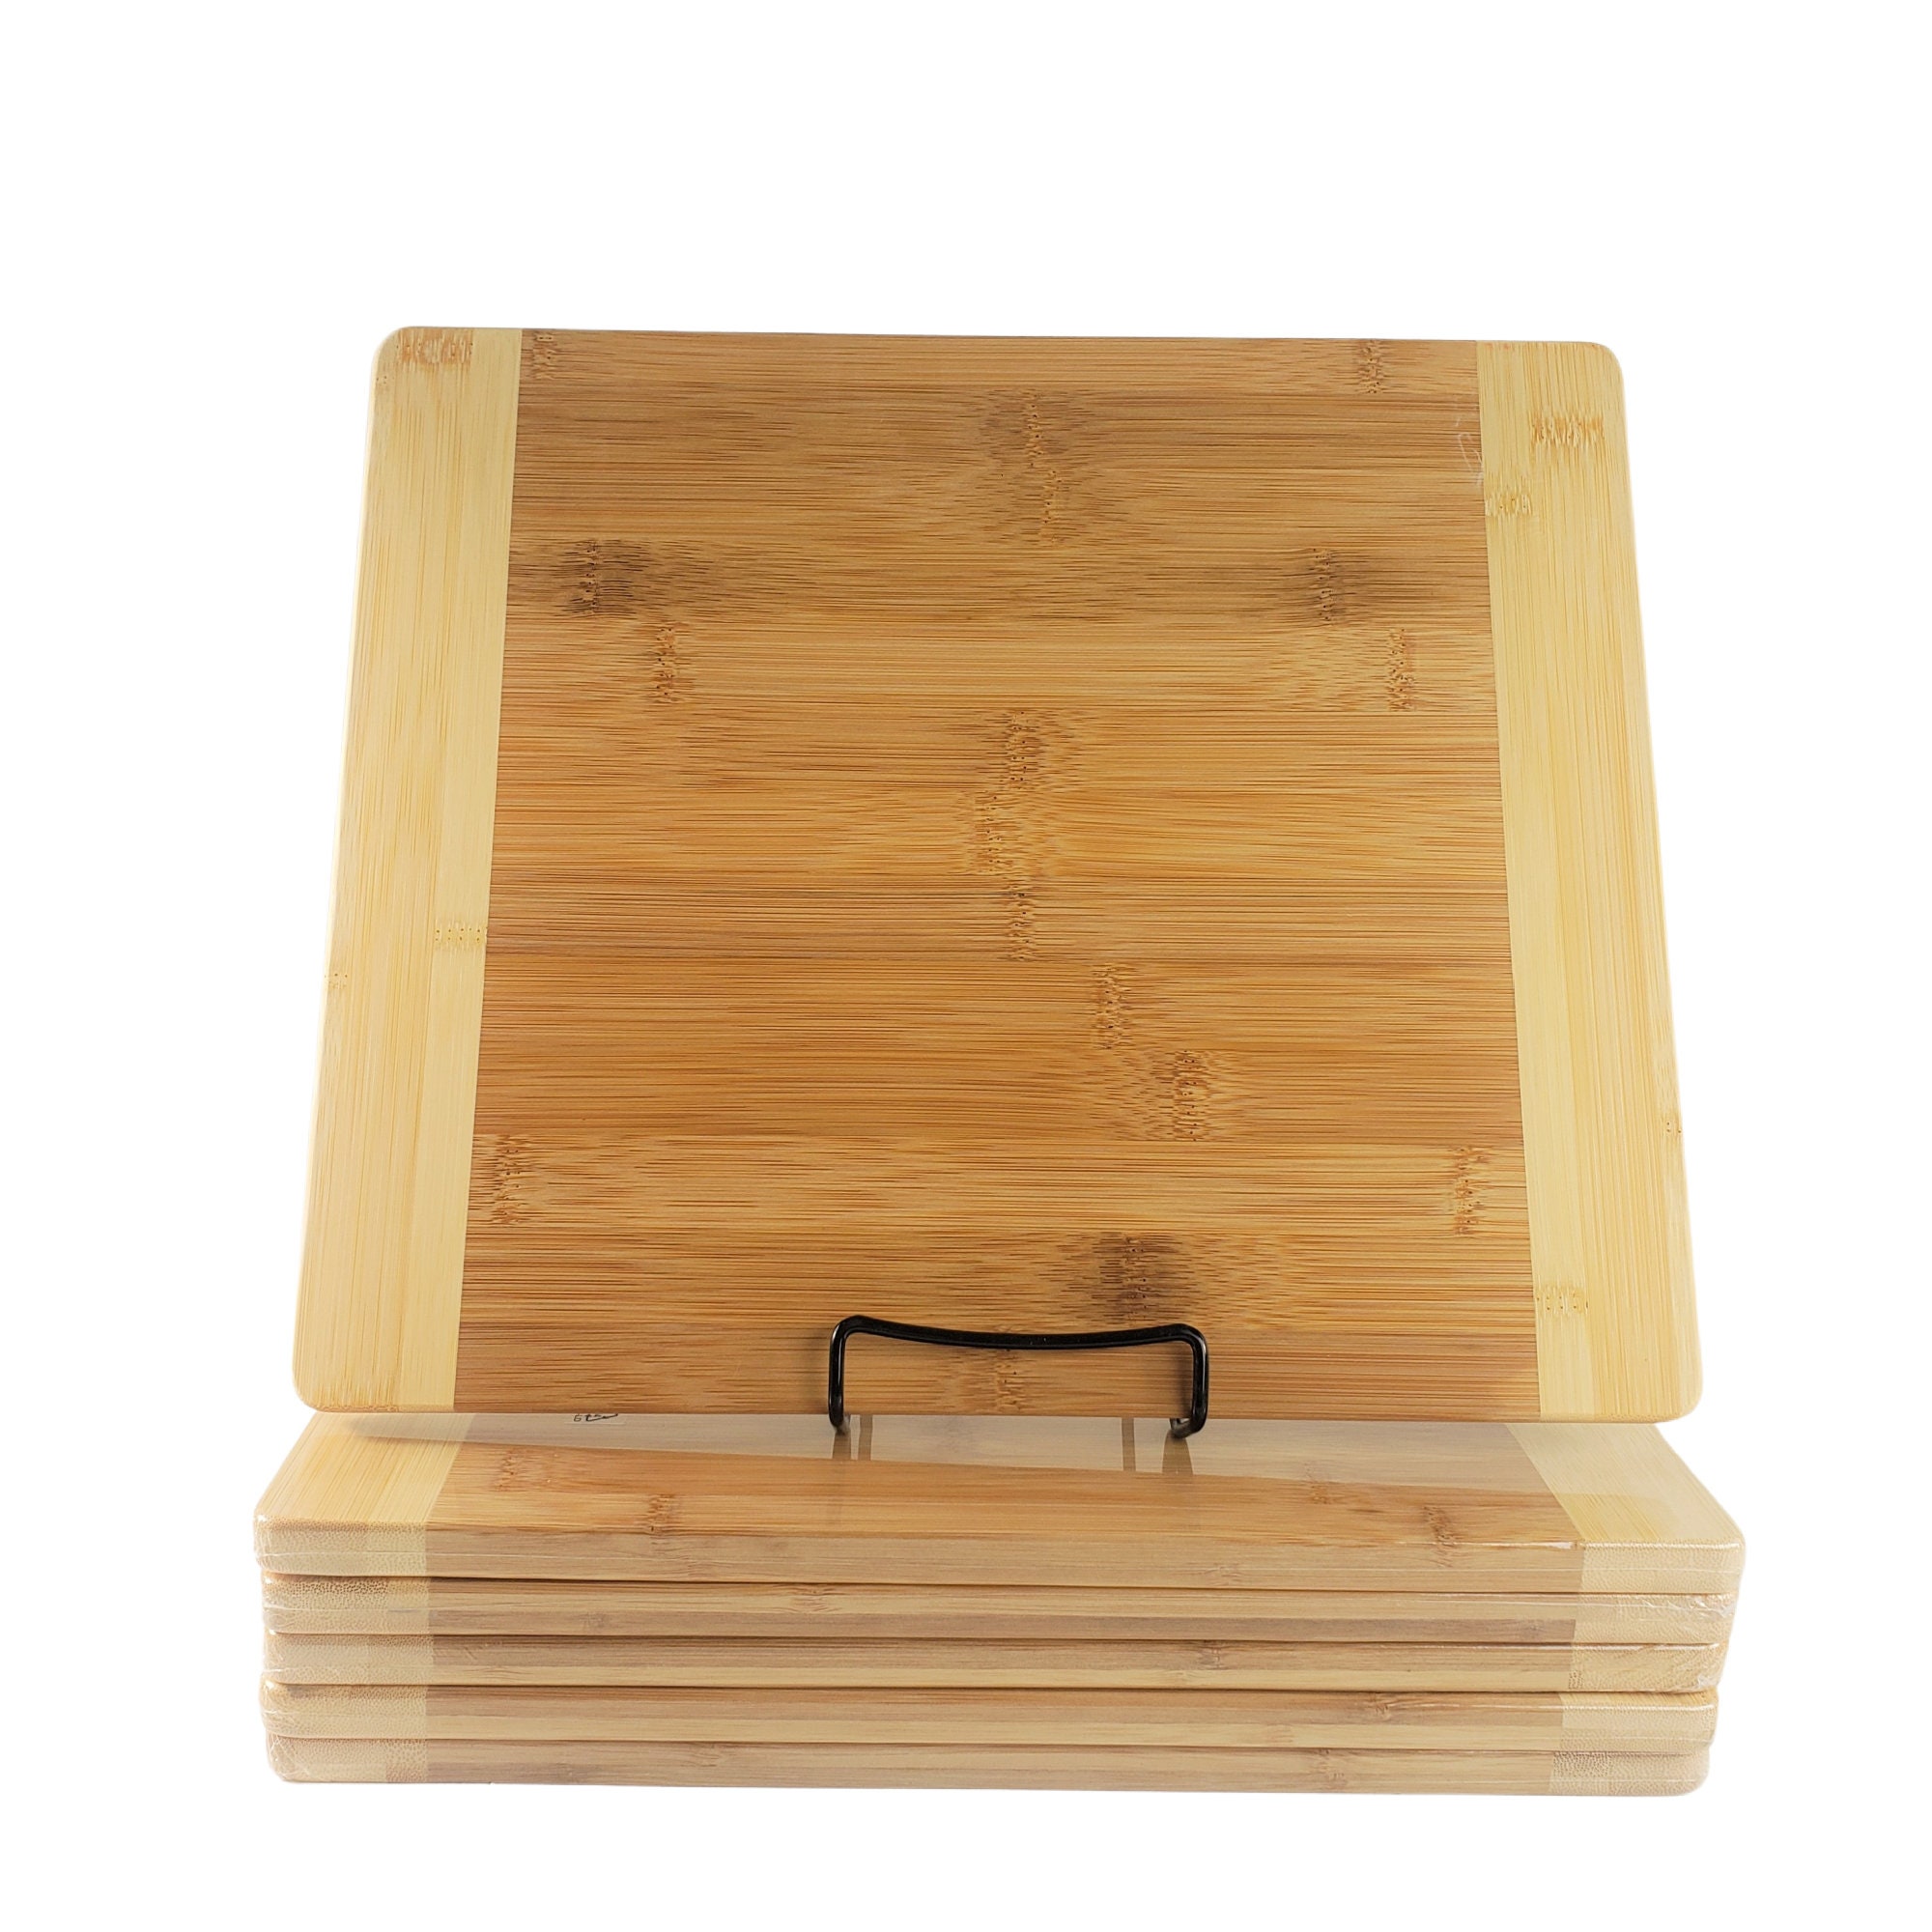 Set of 10) Thick 15X11 Bulk Plain Bamboo Cutting Boards for your store